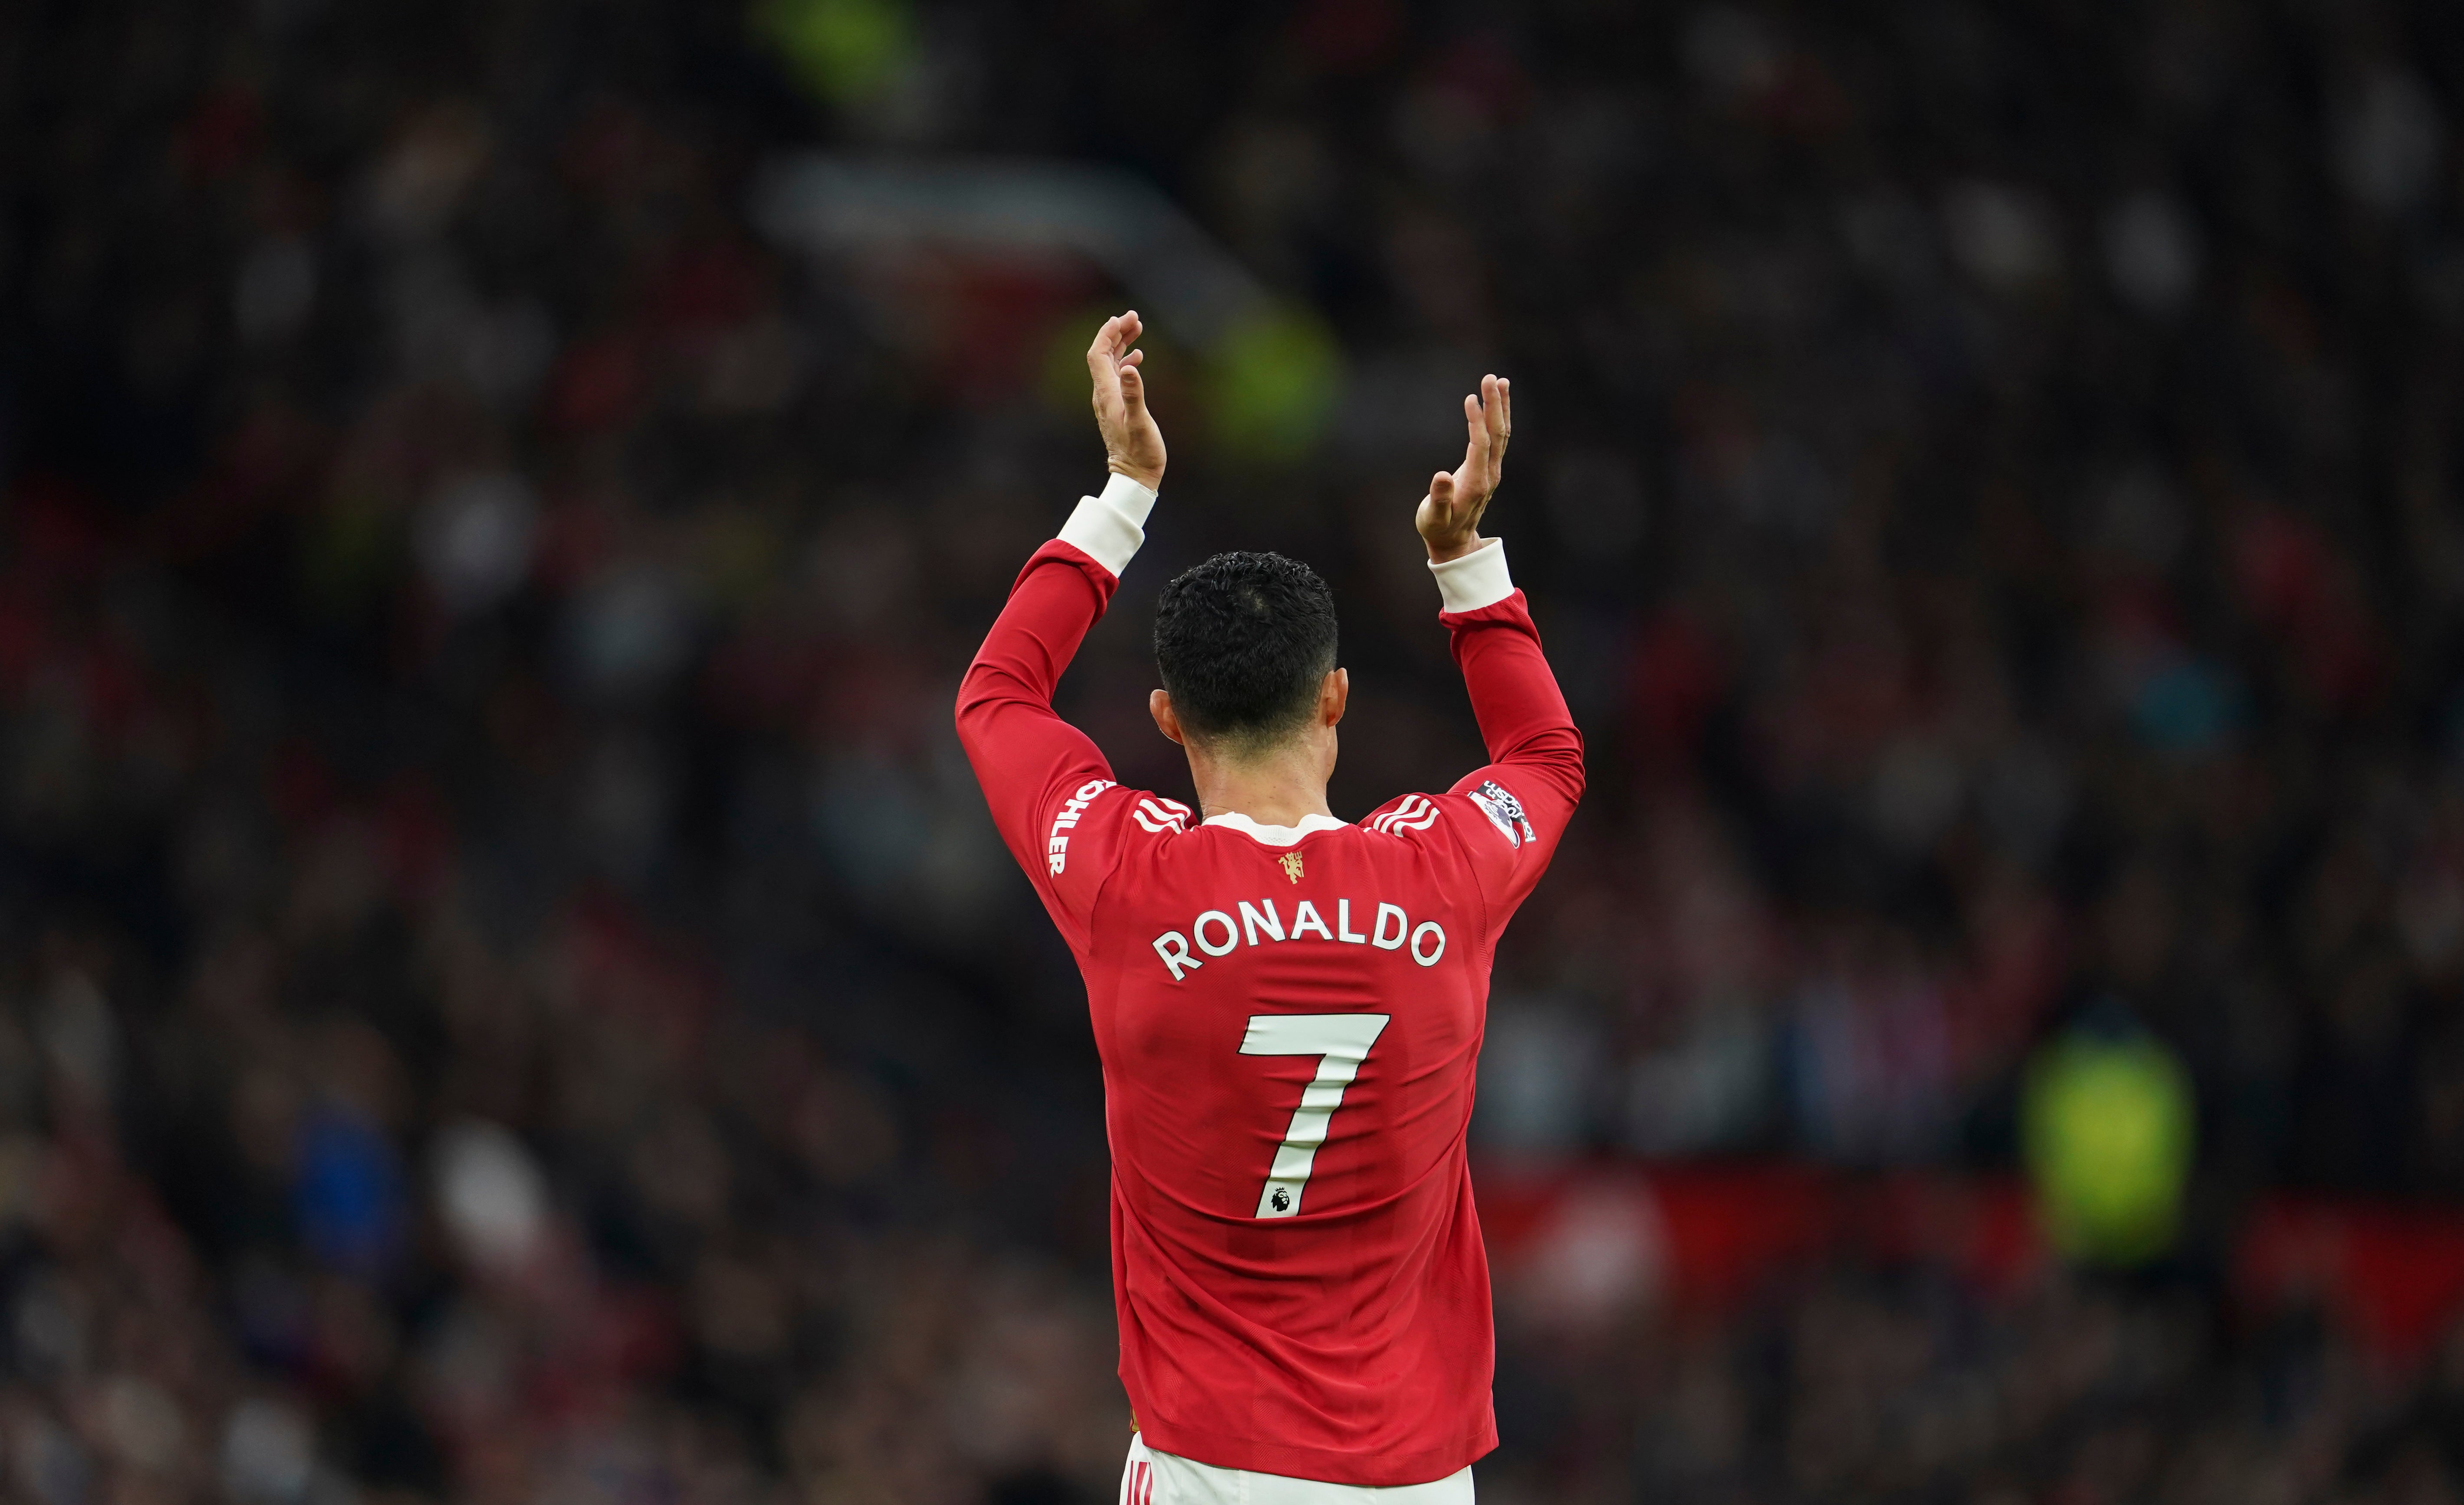 Ronaldo left Manchester United for a second time in November